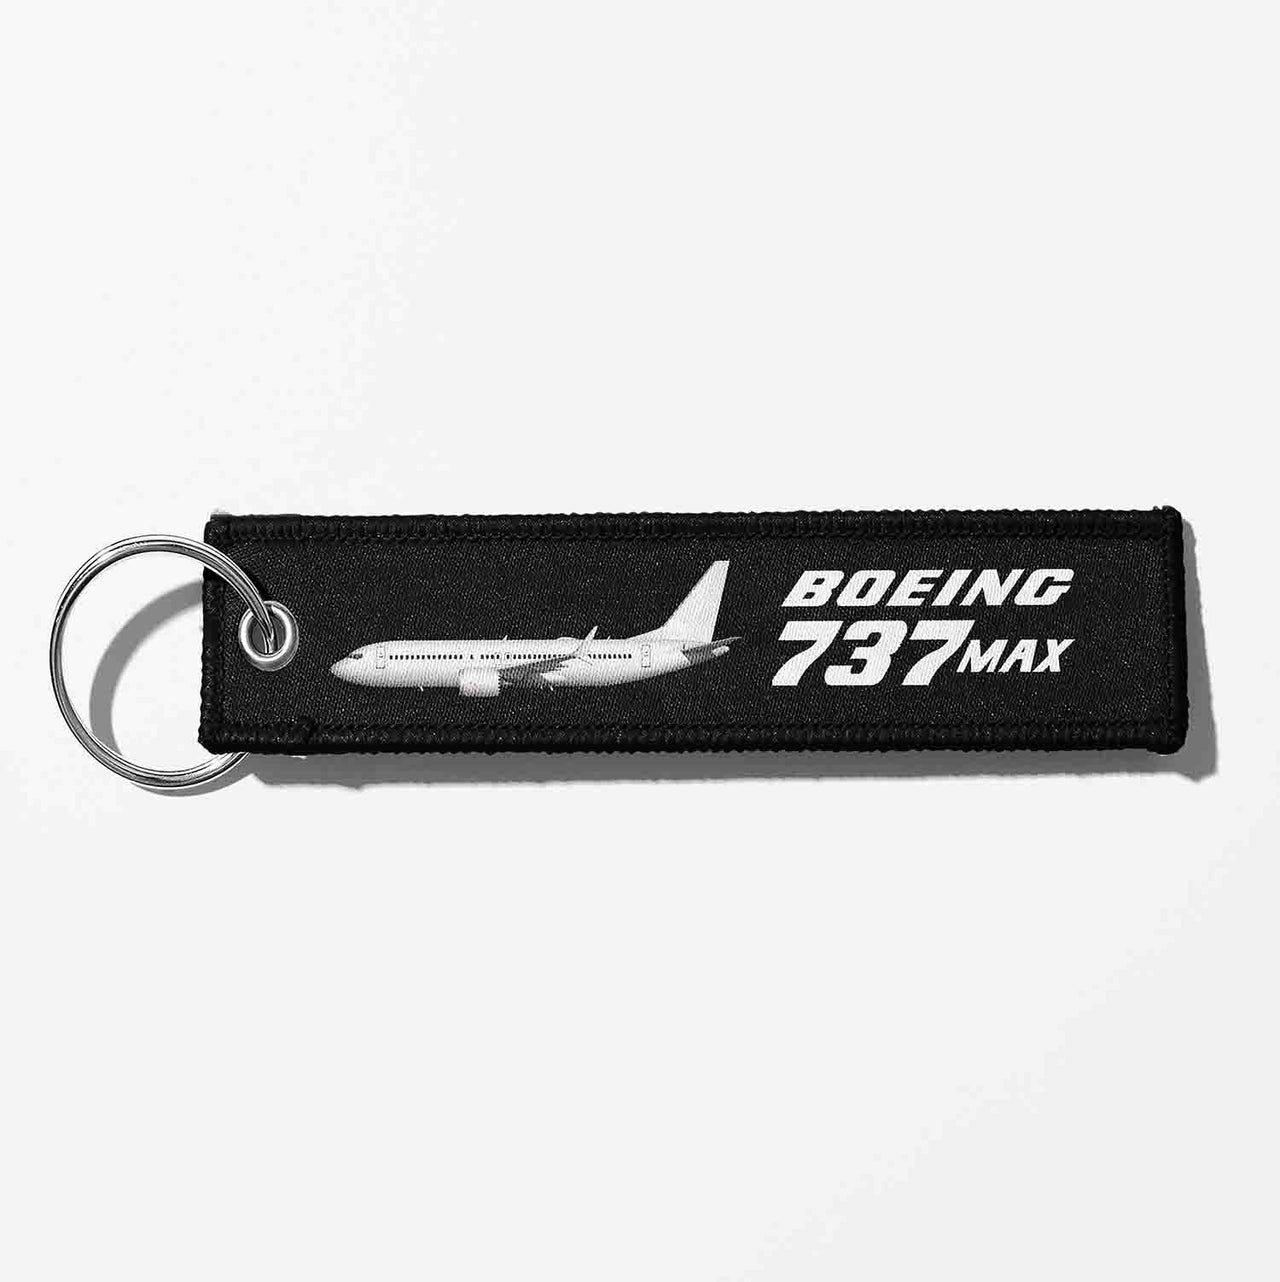 The Boeing 737Max Designed Key Chains